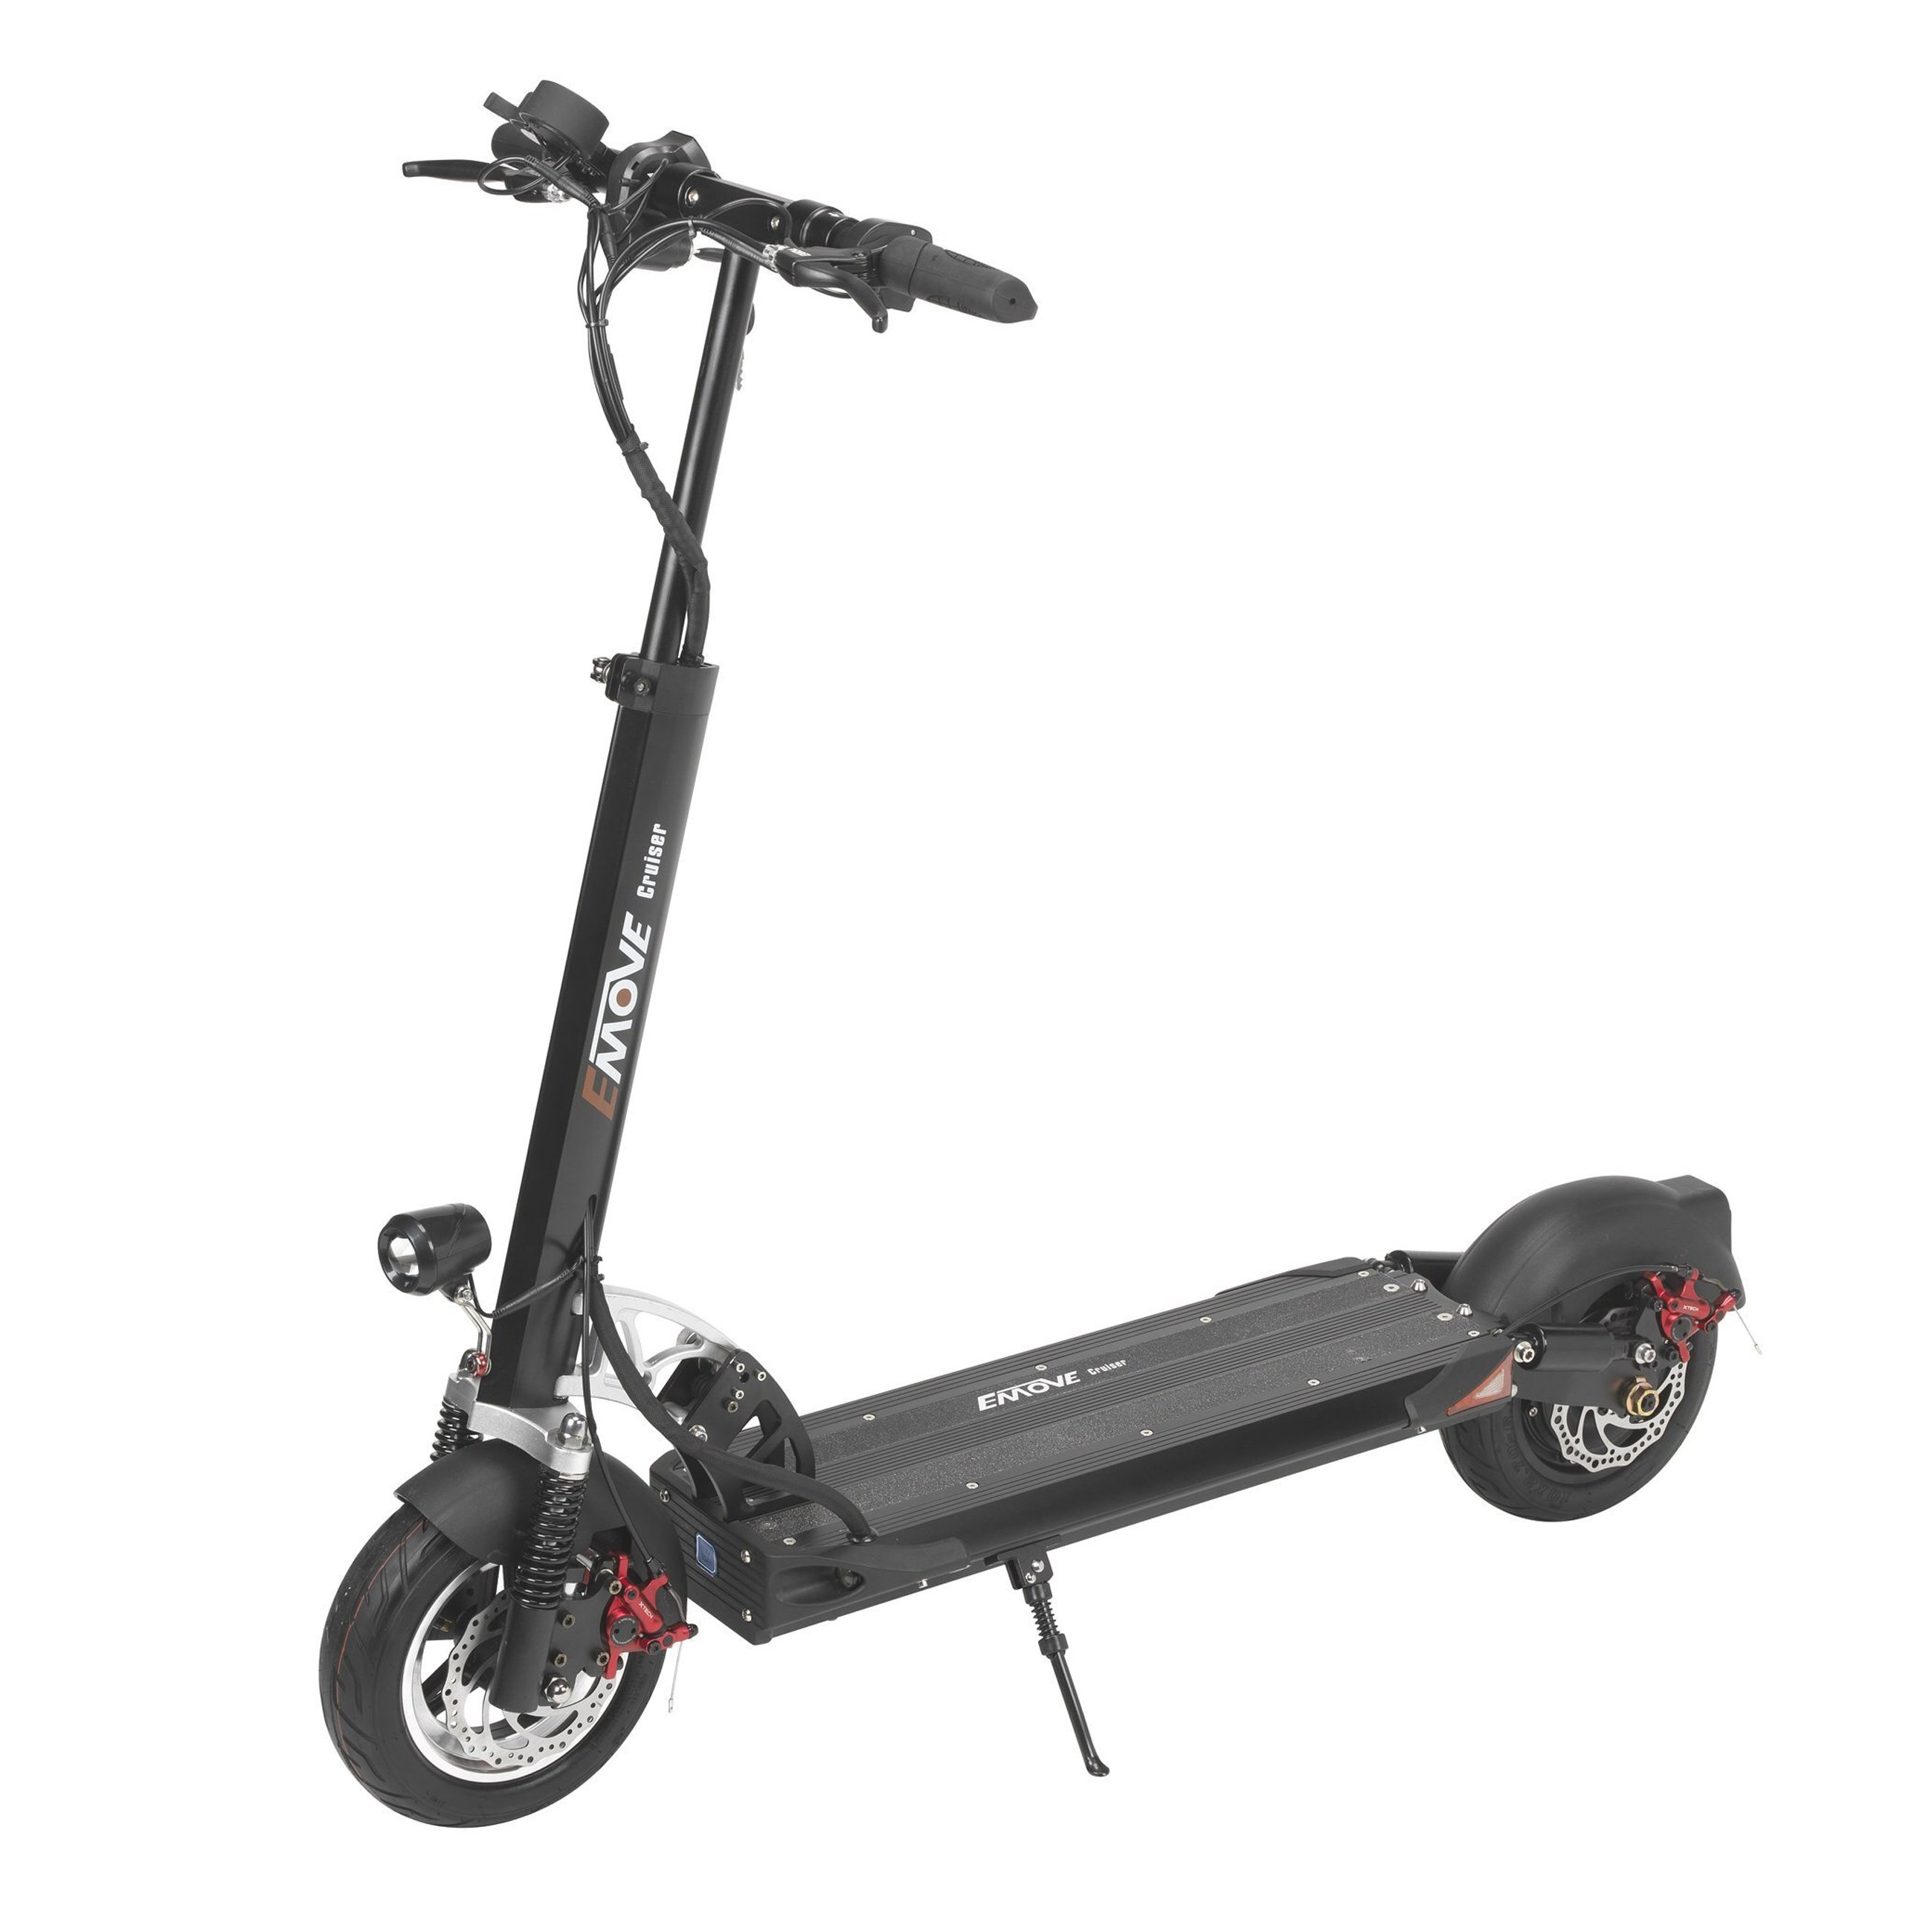 Emove Cruiser Electric Scooter – Black